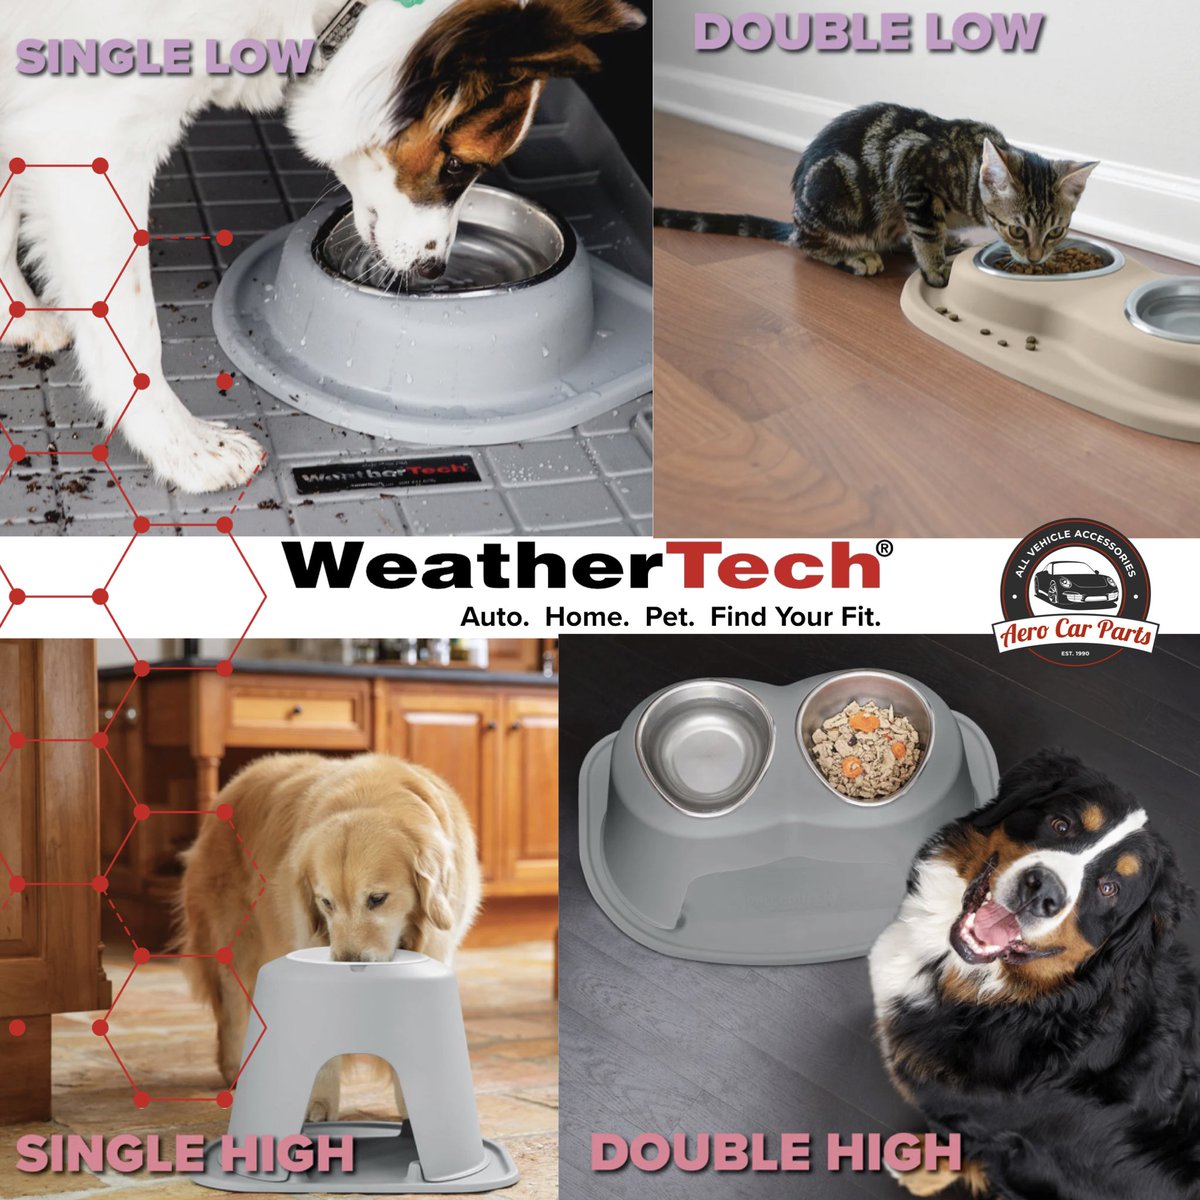 —> Pet Owners 
WEATHERTECH - enhancing meal time: 
* ergonomically designed 
* 100% stainless steel or 
BPA-free plastic, 
* raised outer lip to catch meal time messes. 
* multiple heights 
#yegpets
#edmontonpets #edmontonpetowners #yegpetowners #yegdogs #yegcatsedmonton